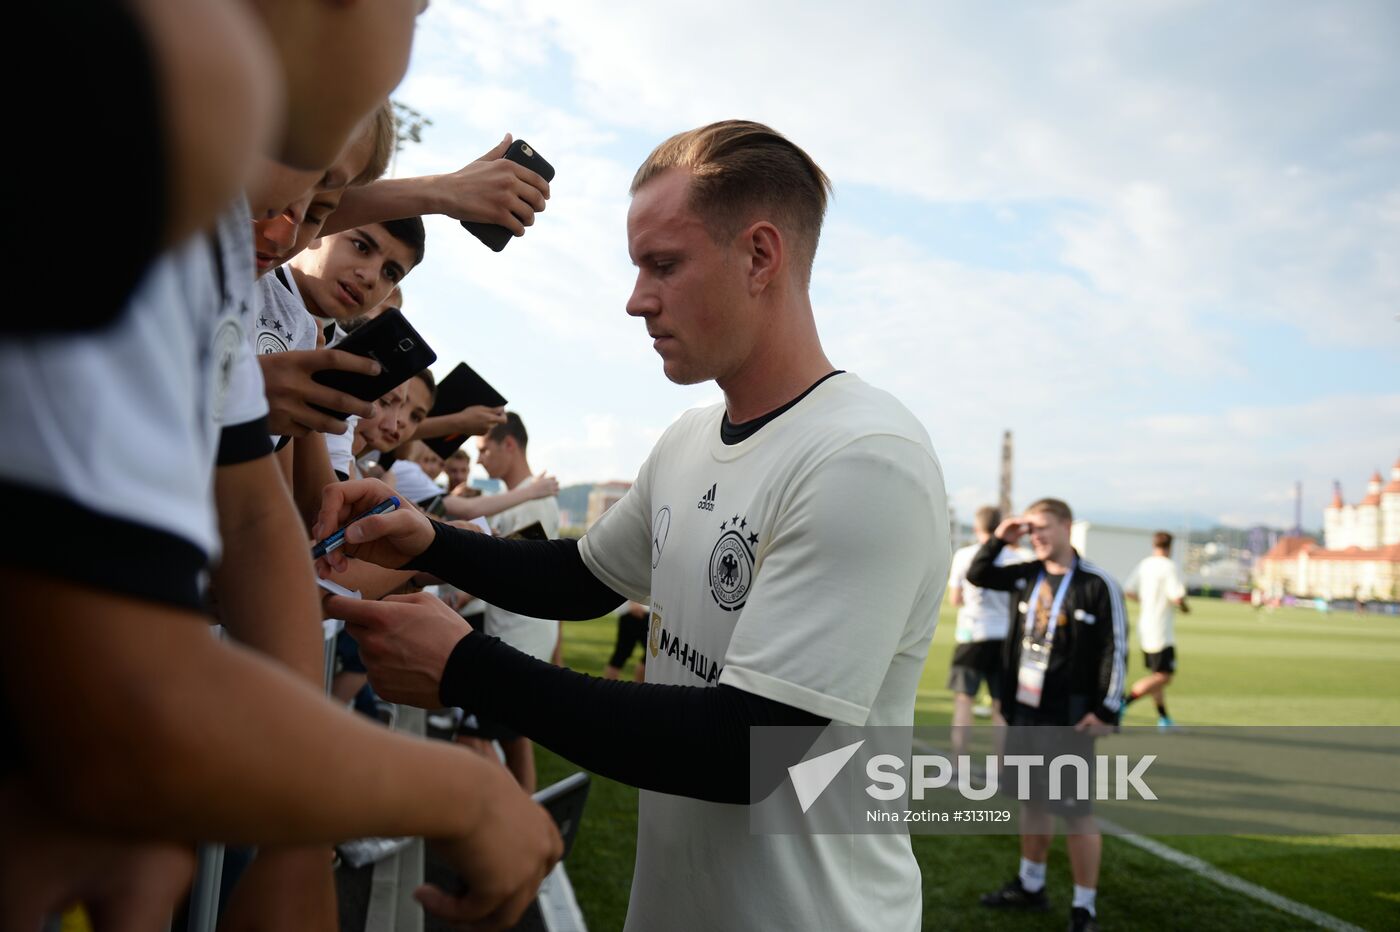 2017 FIFA Confederations Cup. Germany's team holds training session